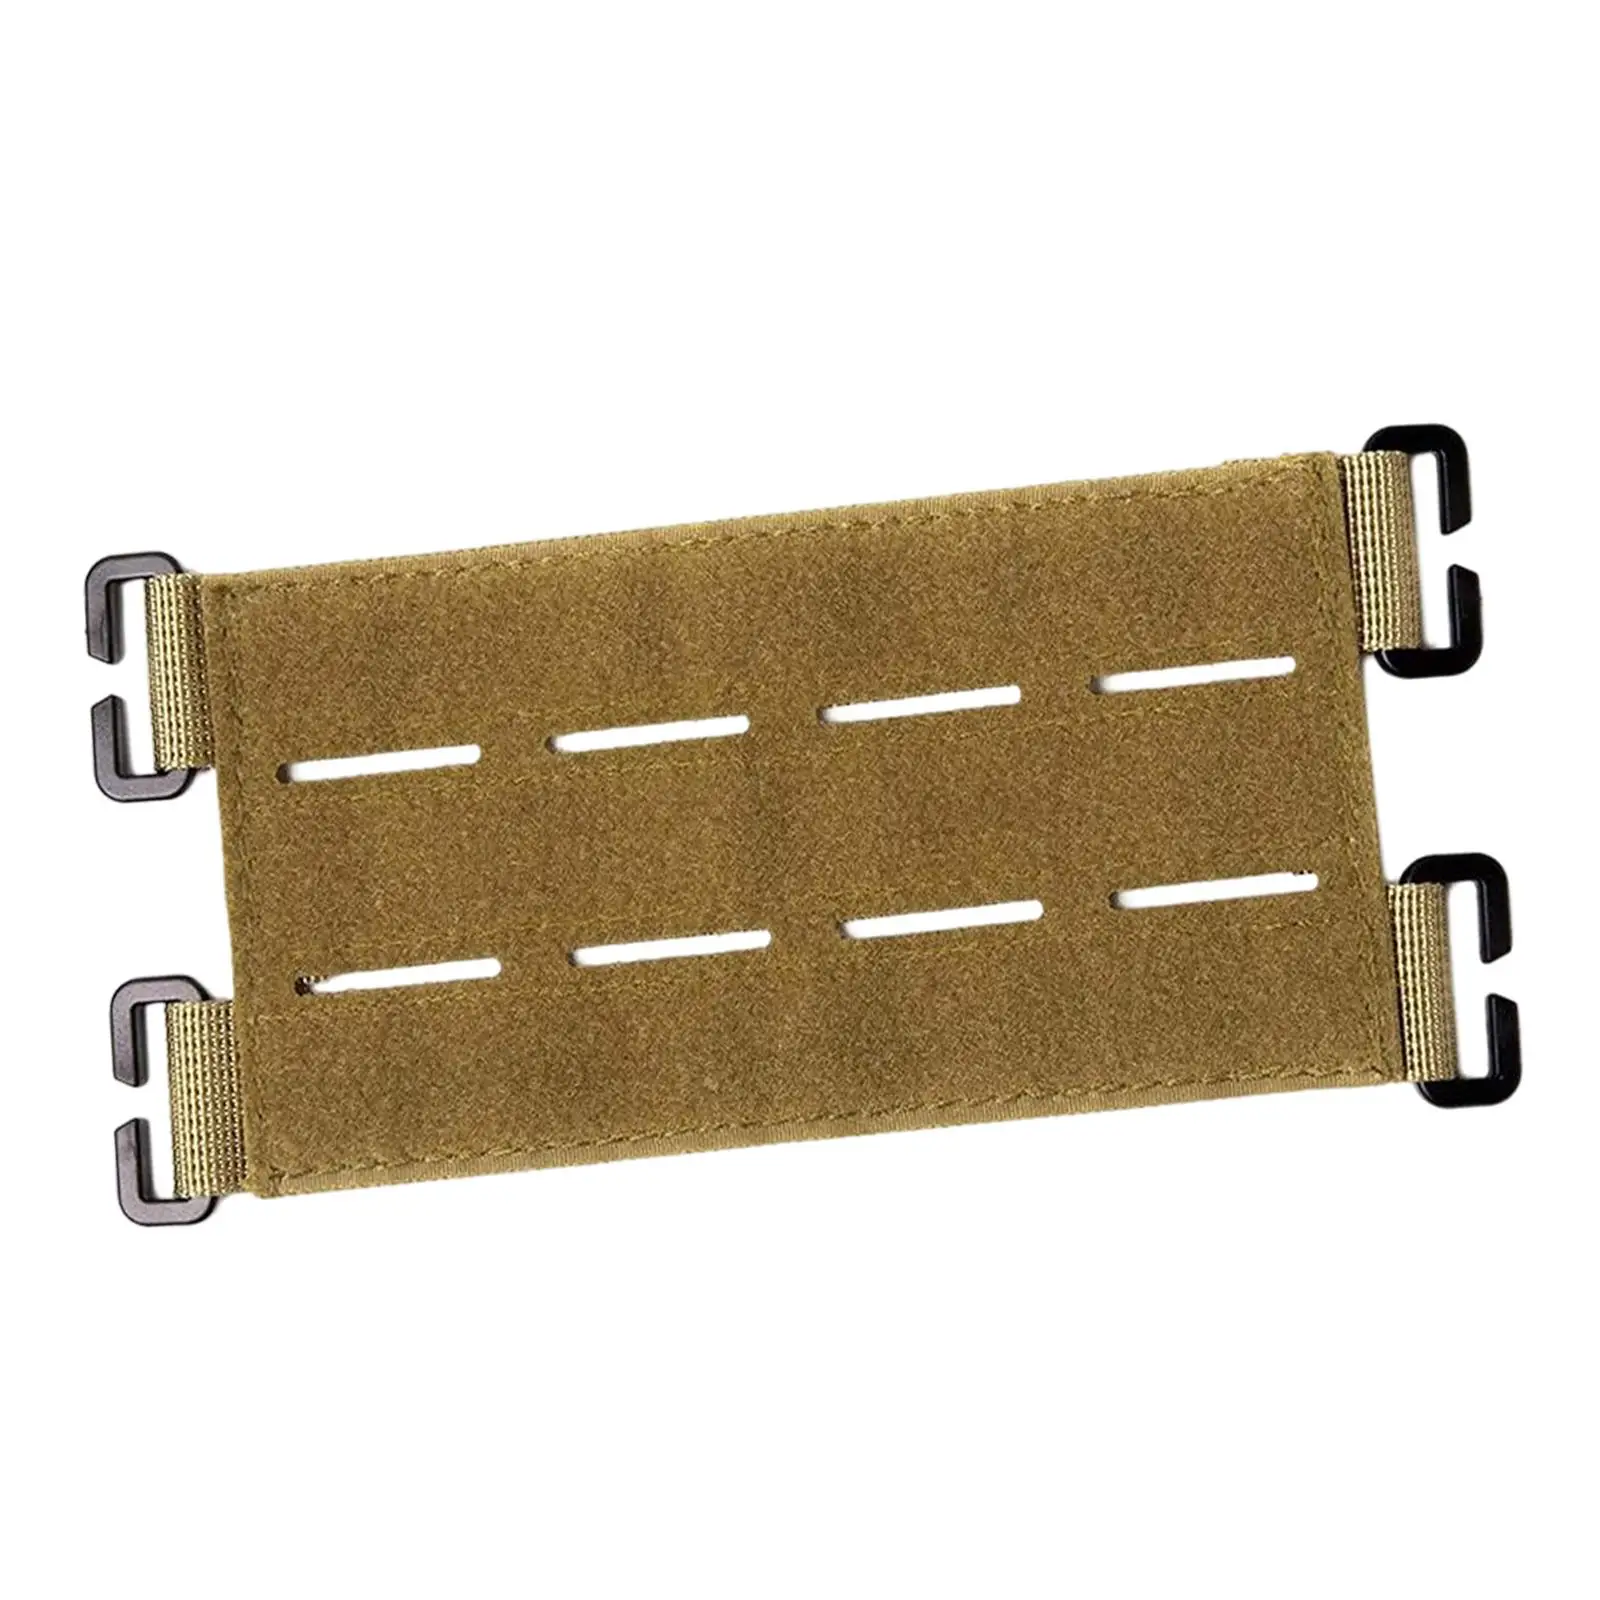 5x5 inch Molle Patch Panel with Laser Cutting Loop,Molle Patch Display  Holder for Backpack,Mini Patch Board for ID Patch Badges - AliExpress